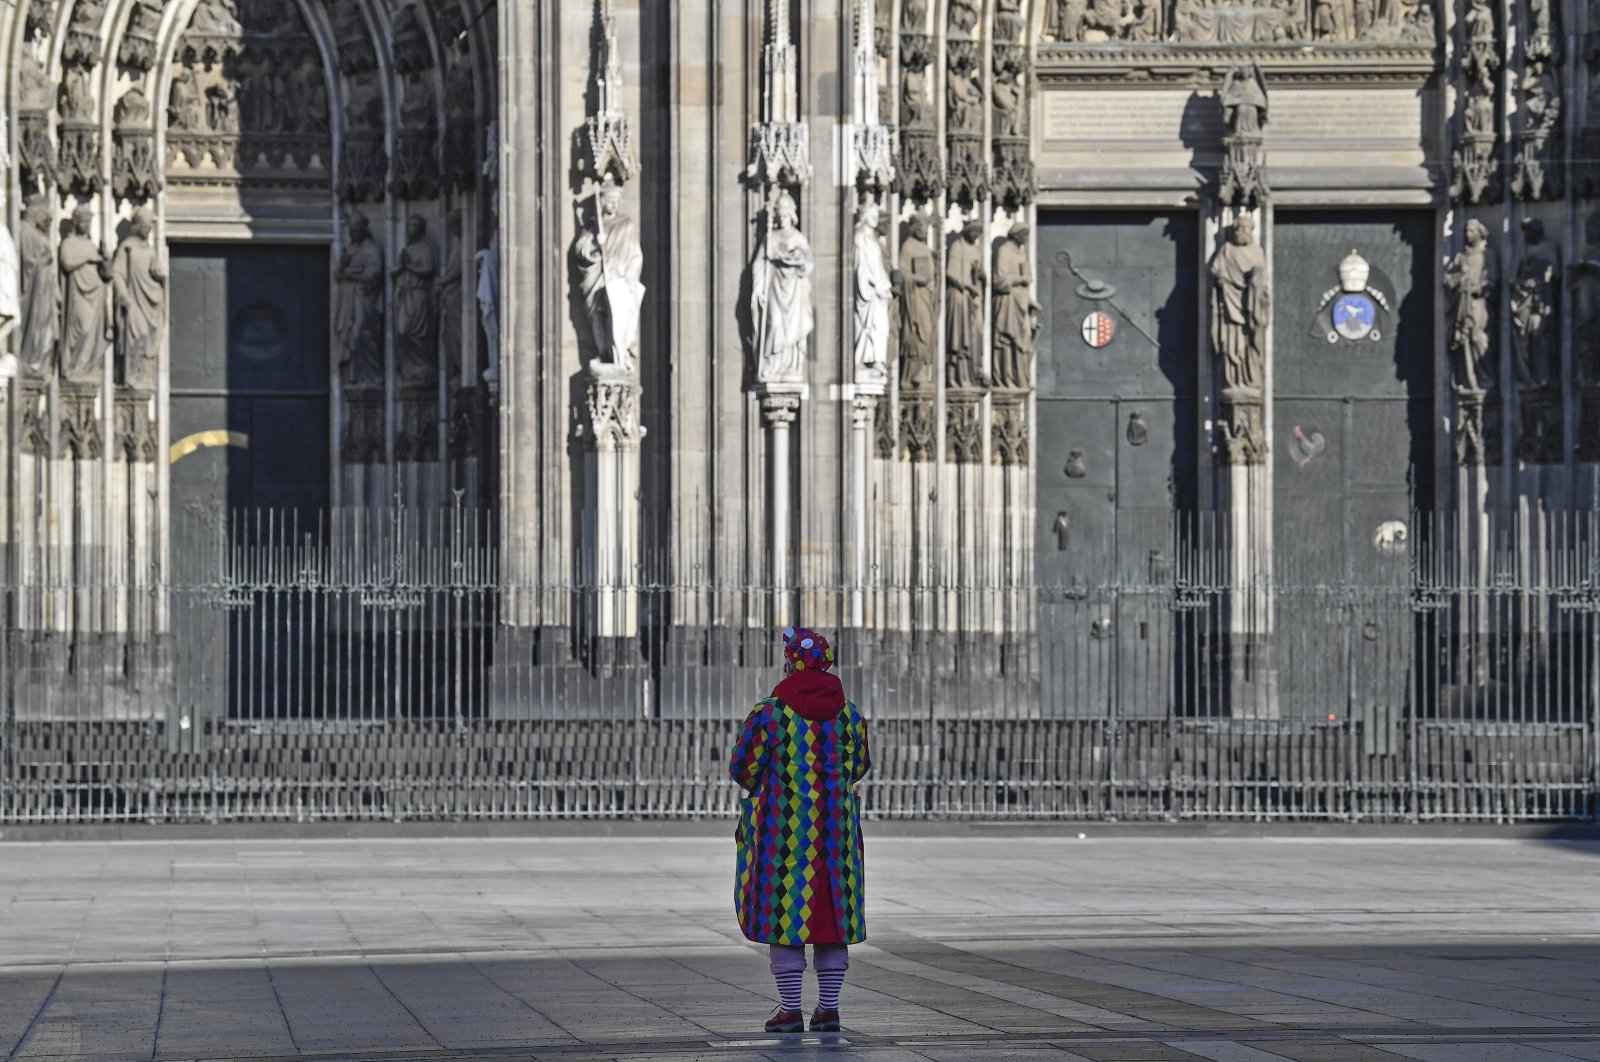 A man in a clown costume stands alone in front of the cathedral when normally tens of thousands of revelers dressed in carnival costumes would celebrate the start of the street carnival in Cologne, Germany, Feb. 11, 2021. (AP Photo)